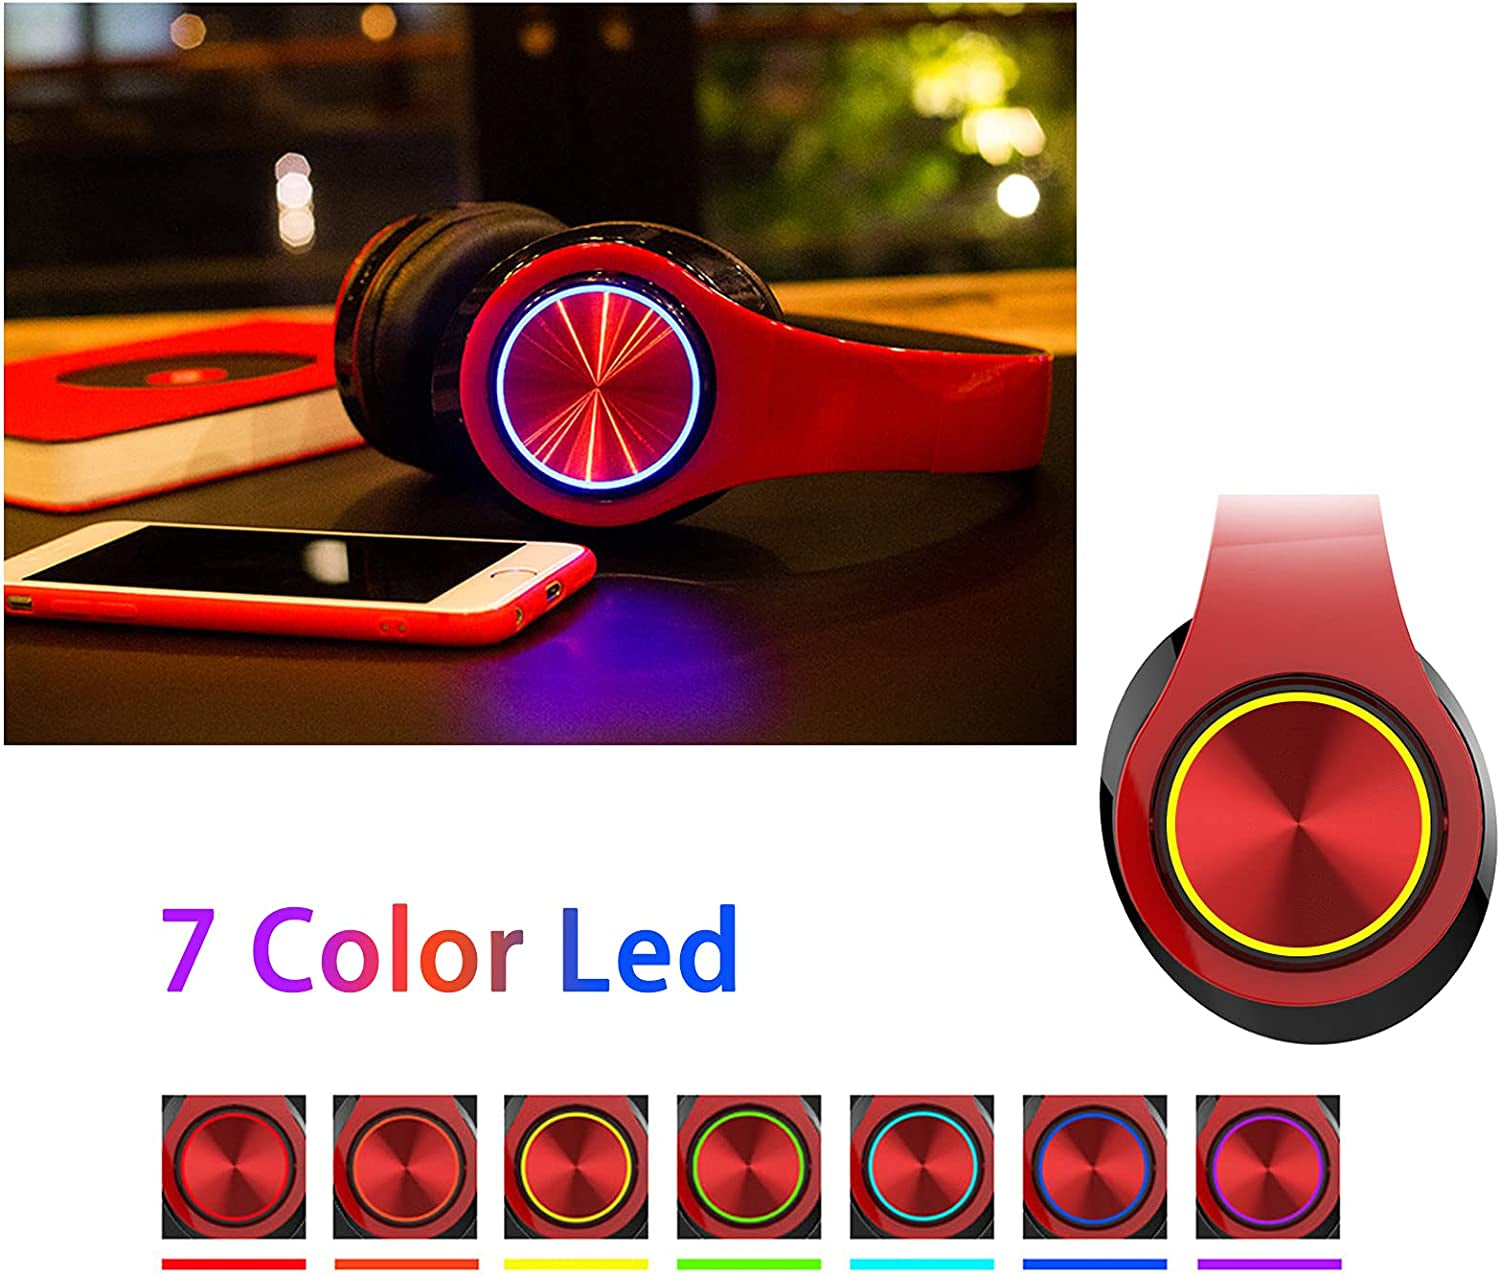 Over Ear Bluetooth Headphones, Foldable LED Stereo Headphones with Built-In Microphone, Noise-Cancelling Wireless Headset for Pc, Smart Phone, TV